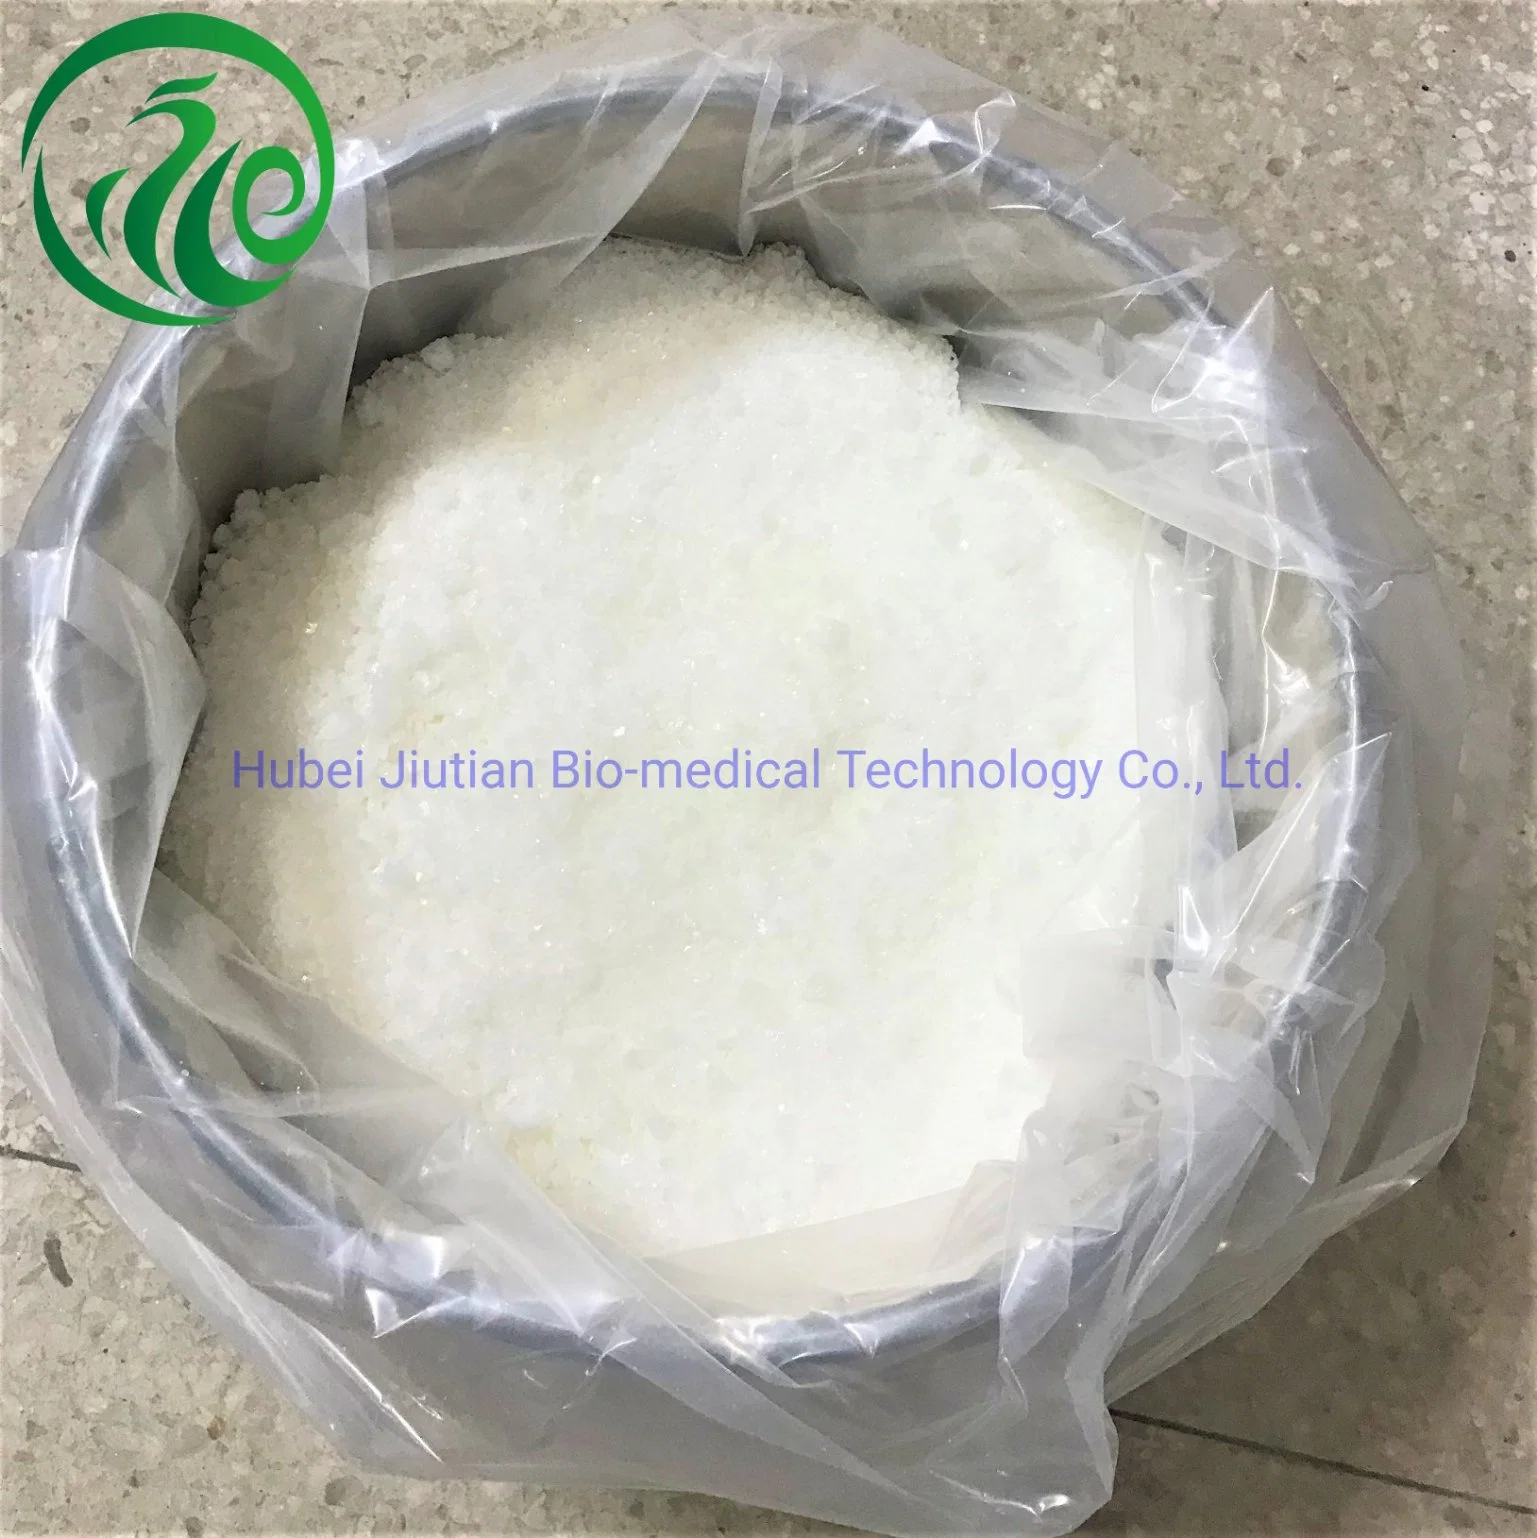 4'-Hydroxyacetophenone Crystal CAS No. 99-93-4 Raw Materials to China Suppliers